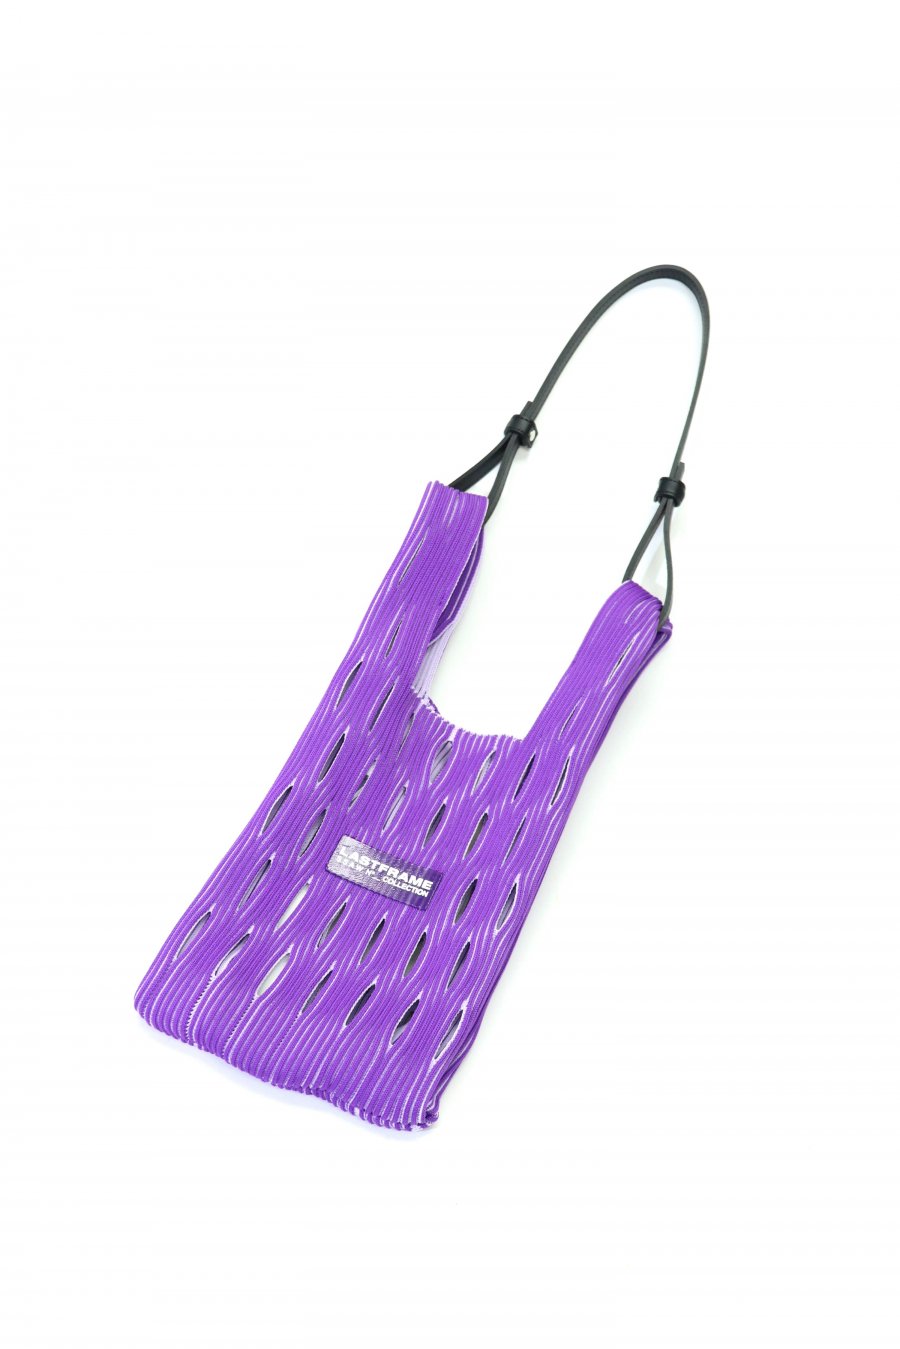 LASTFRAME  TWO TONE MESH MARKET BAG SMALL (PURPLE x LAVENDER)<img class='new_mark_img2' src='https://img.shop-pro.jp/img/new/icons15.gif' style='border:none;display:inline;margin:0px;padding:0px;width:auto;' />